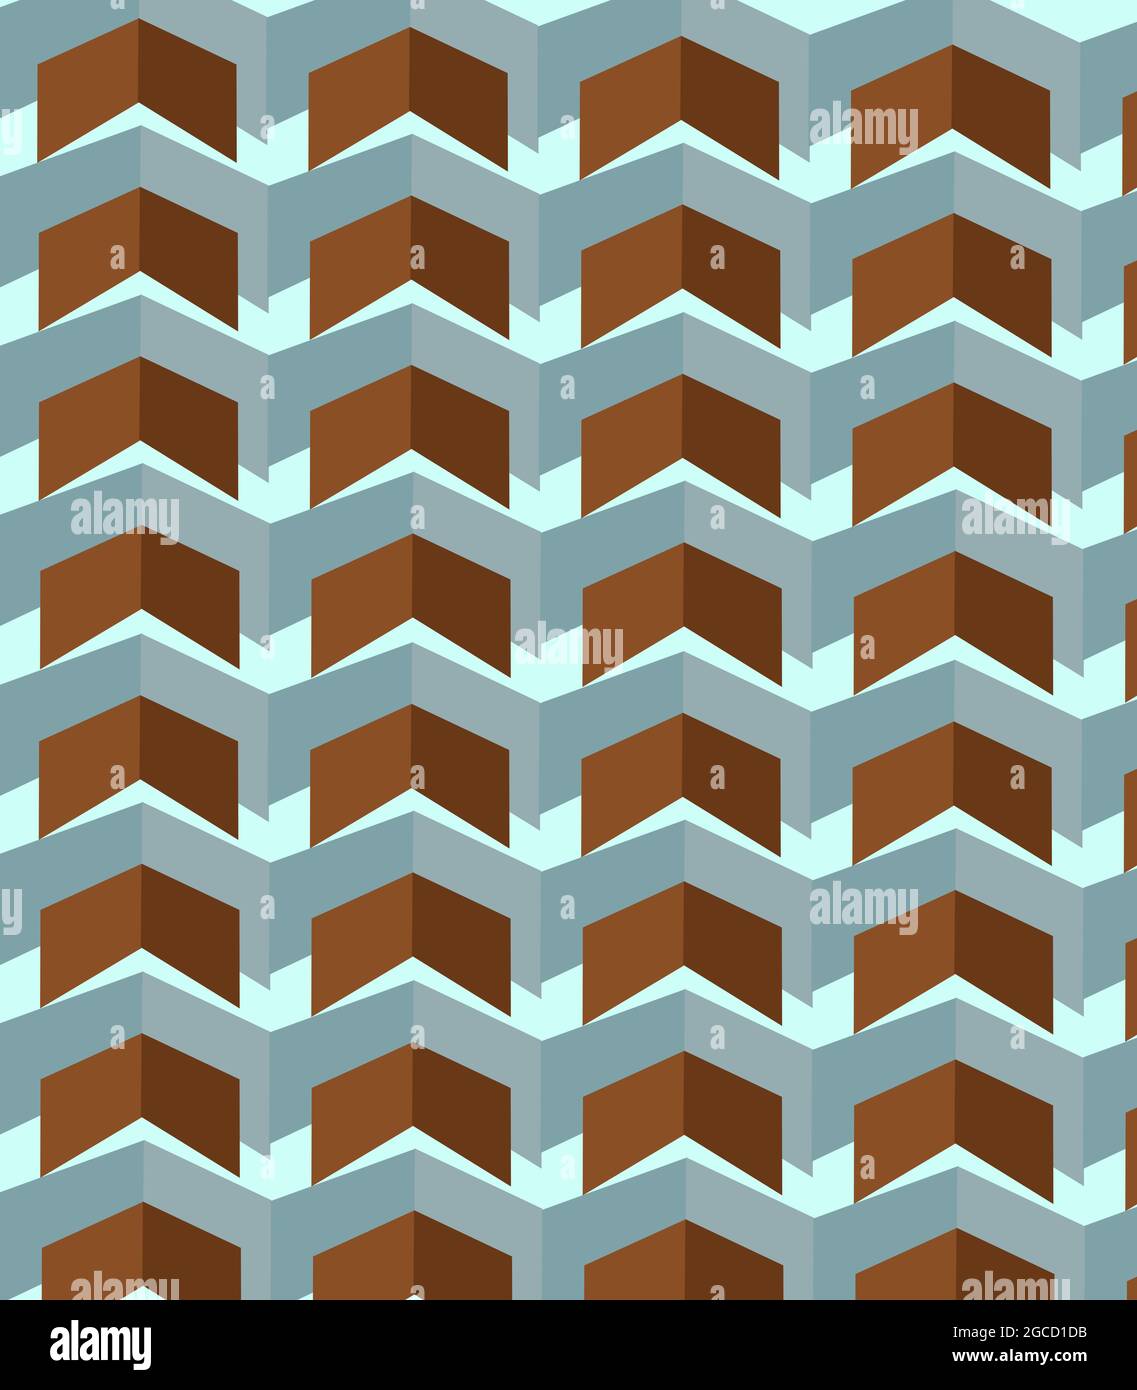 Rhombus in different Shapes in Brown, grey, cyan, Graphic pattern Stock Photo